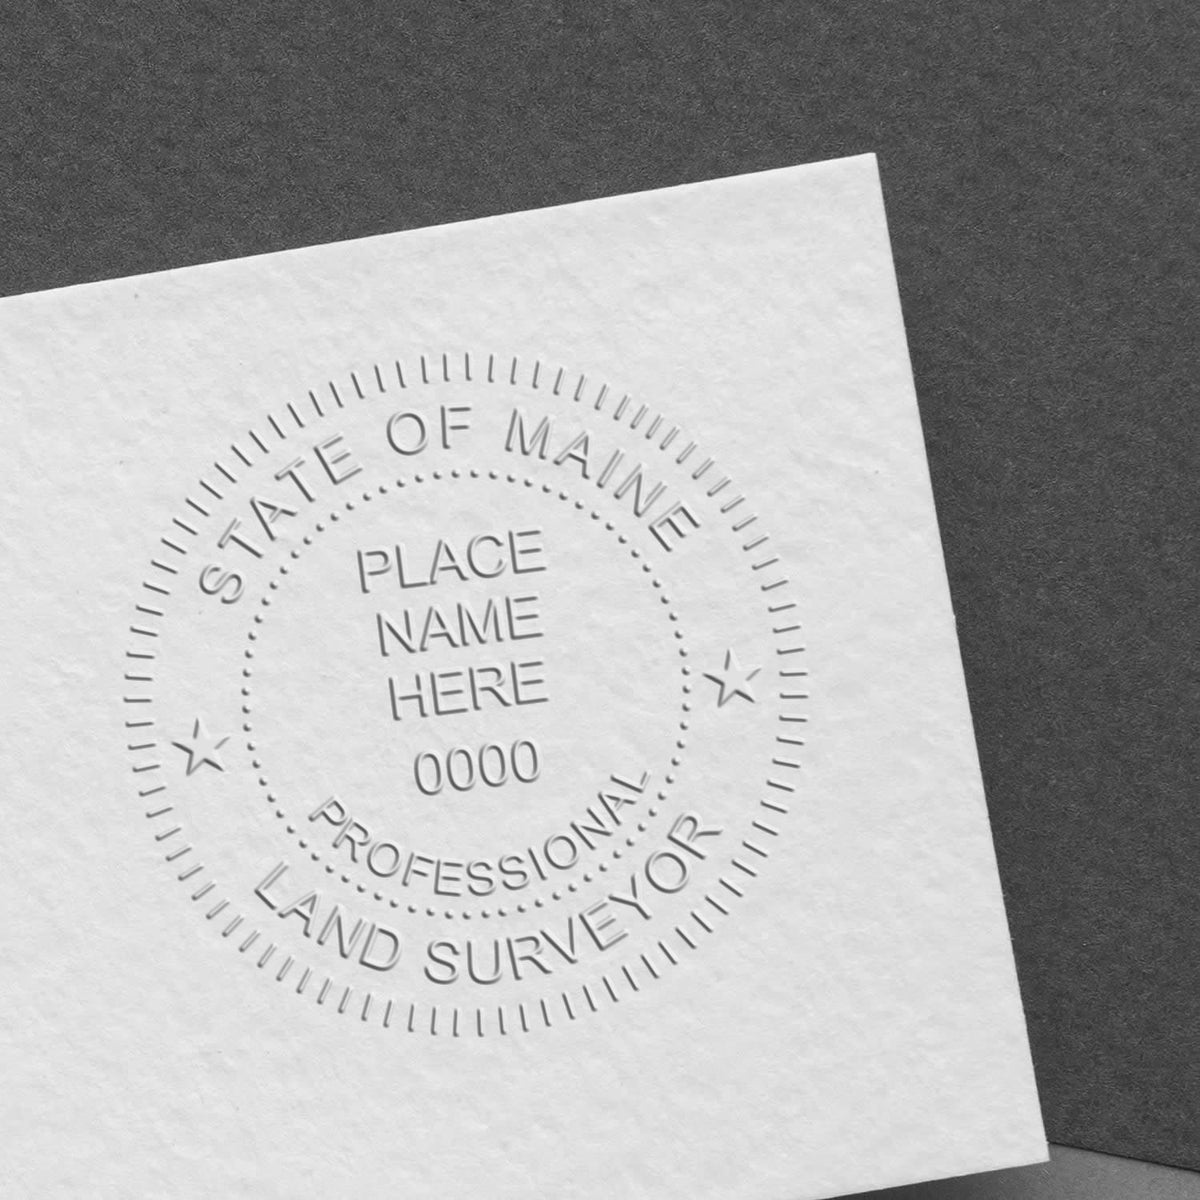 Another Example of a stamped impression of the Long Reach Maine Land Surveyor Seal on a piece of office paper.